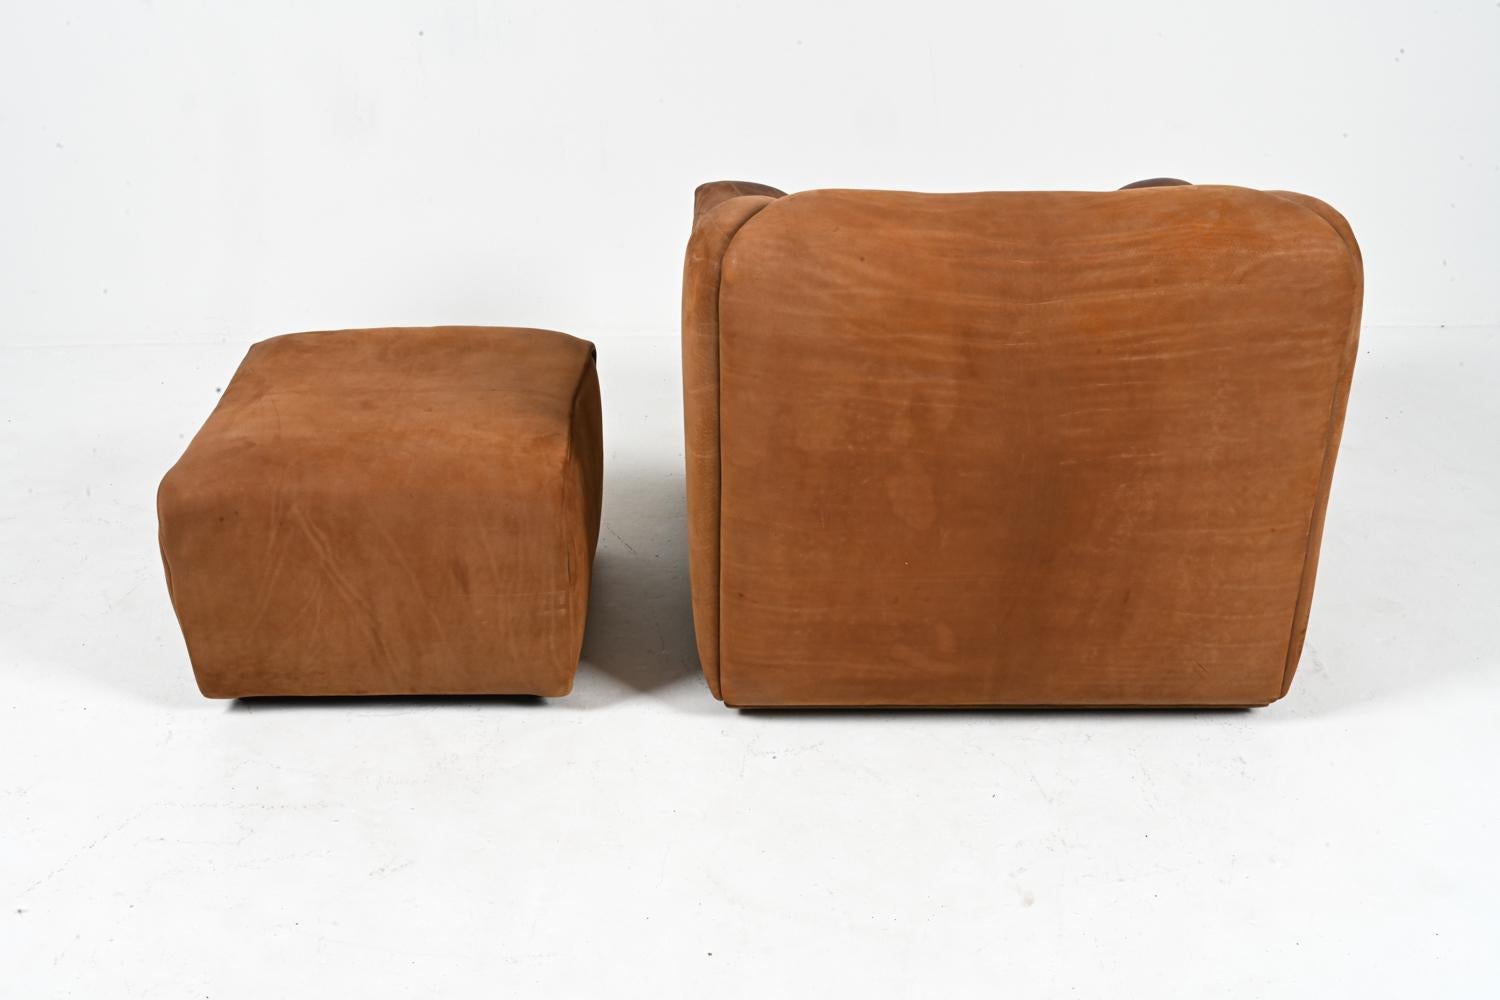 De Sede DS-47 Lounge Chair & Ottoman in Nubuck Leather, c. 1970's For Sale 4